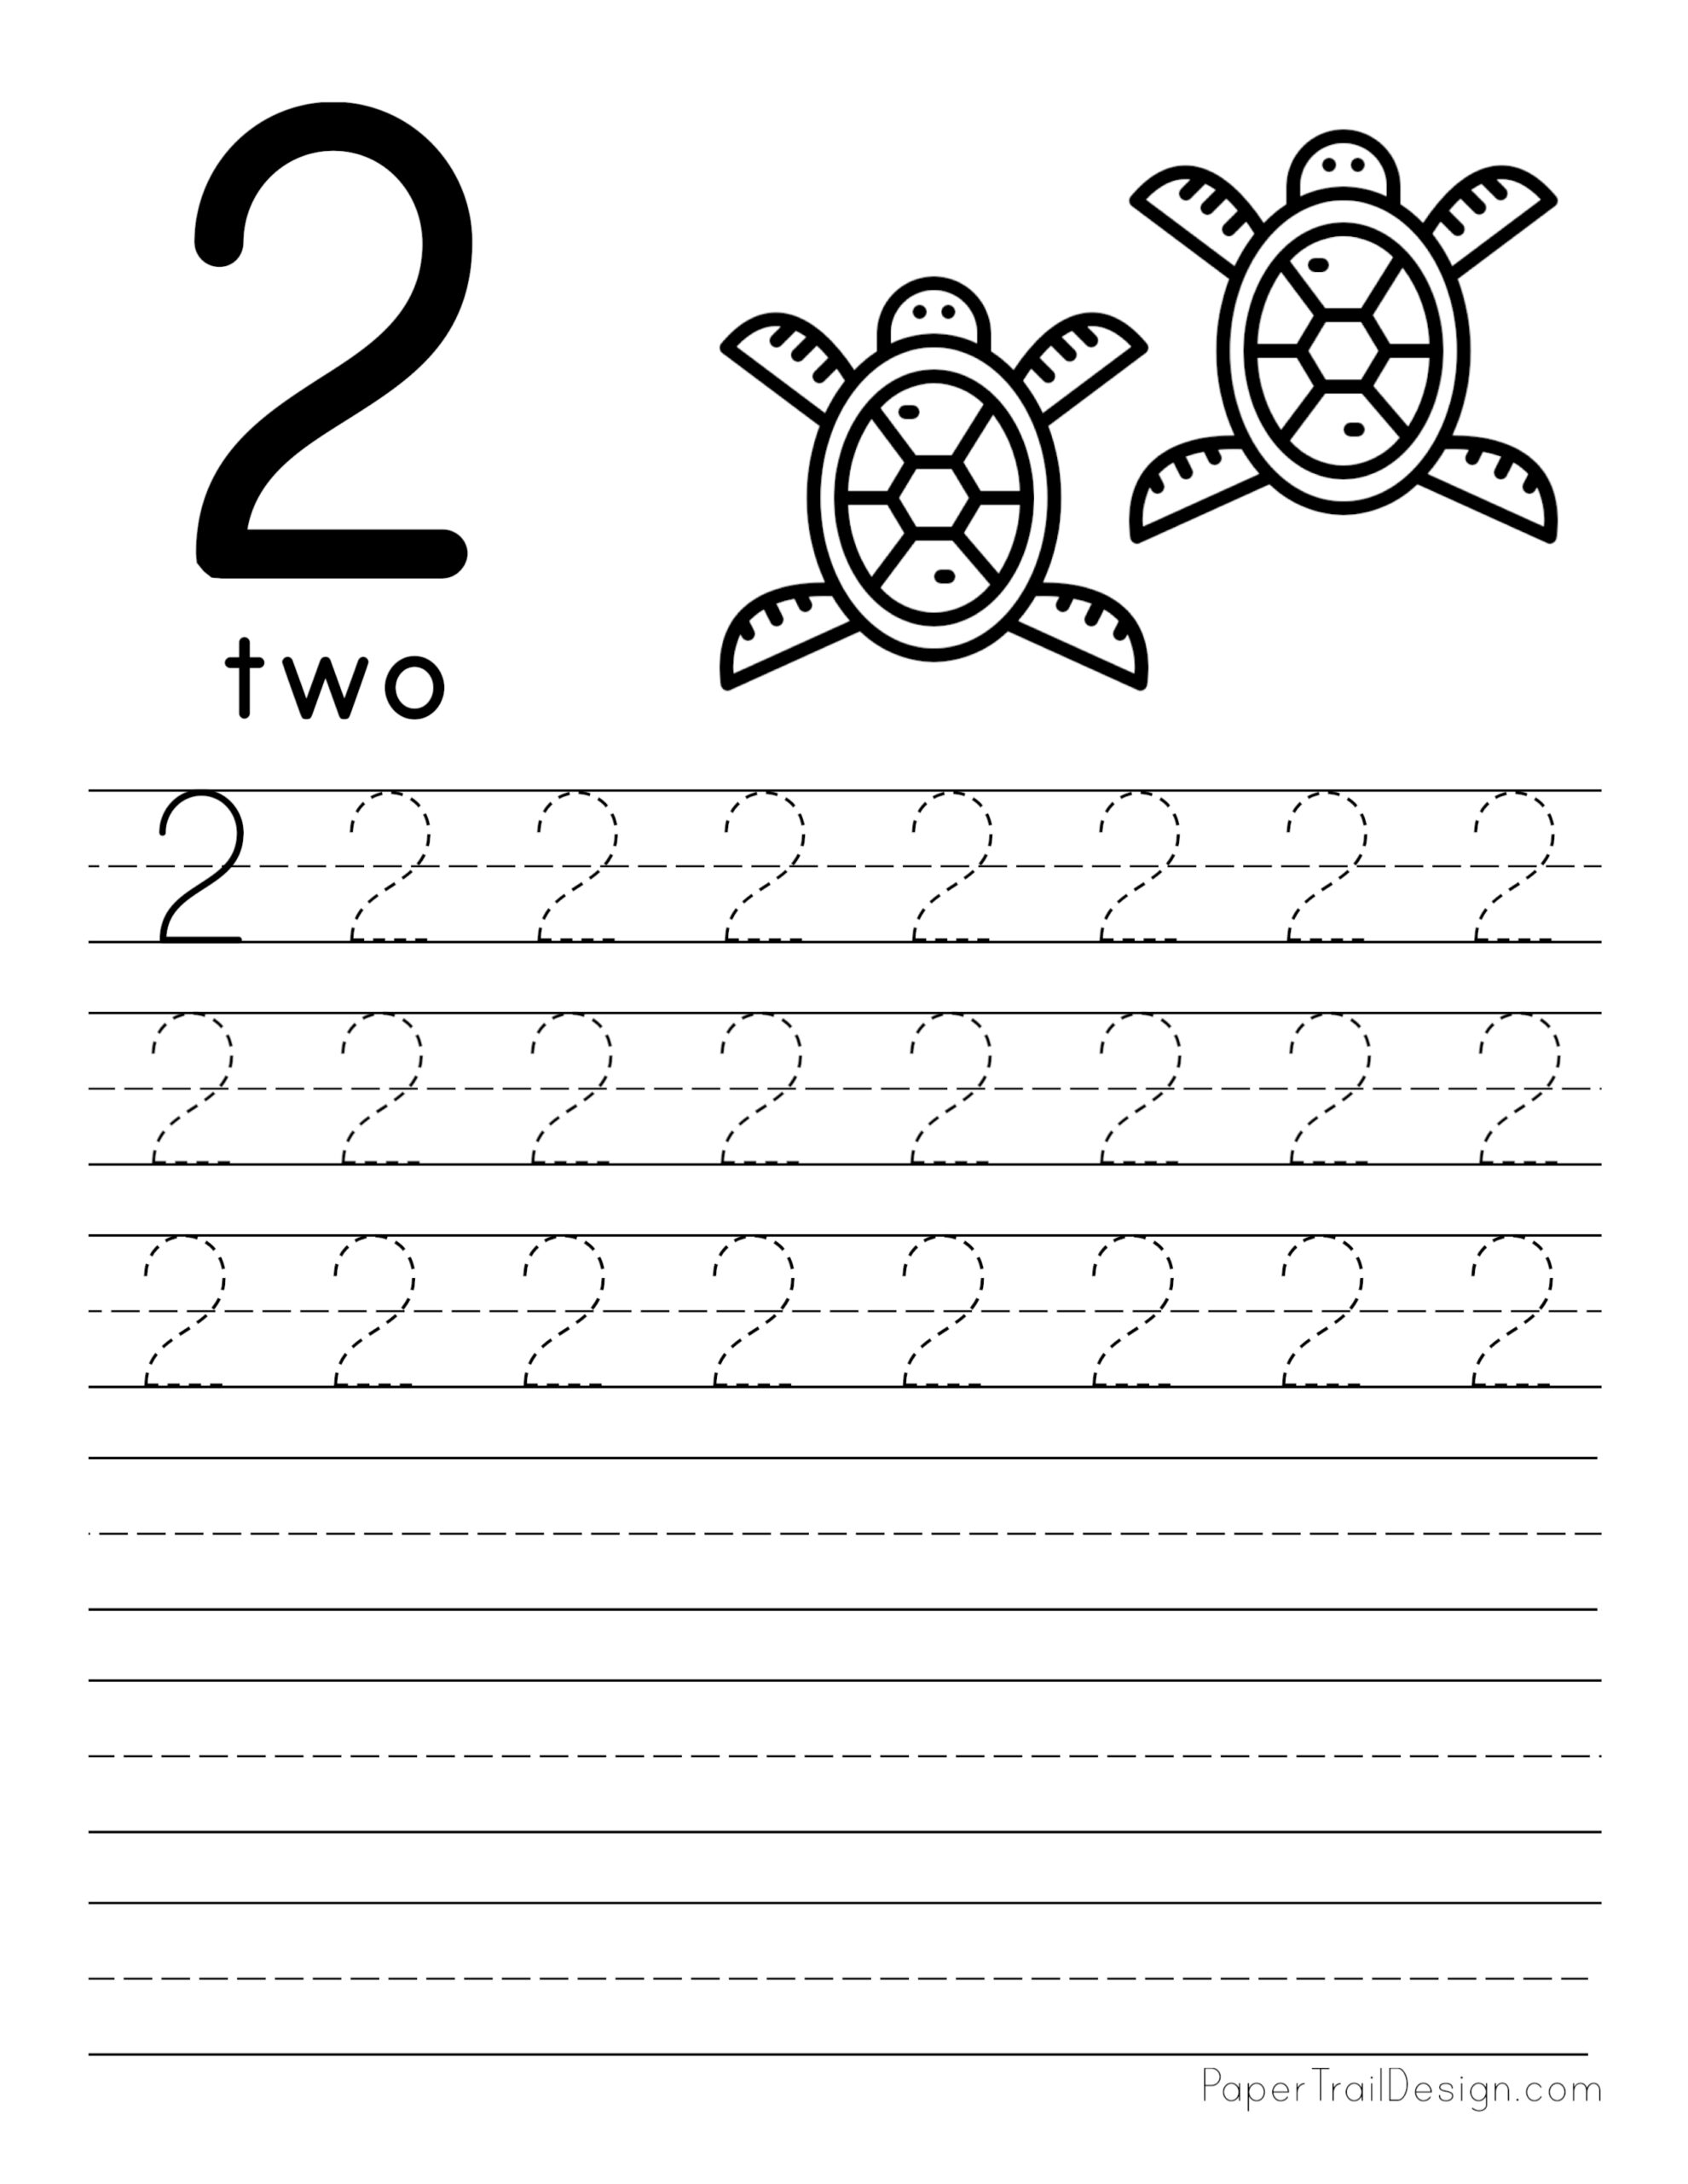 number-3-preschool-printables-free-worksheets-and-coloring-pages-for-kids-learning-num